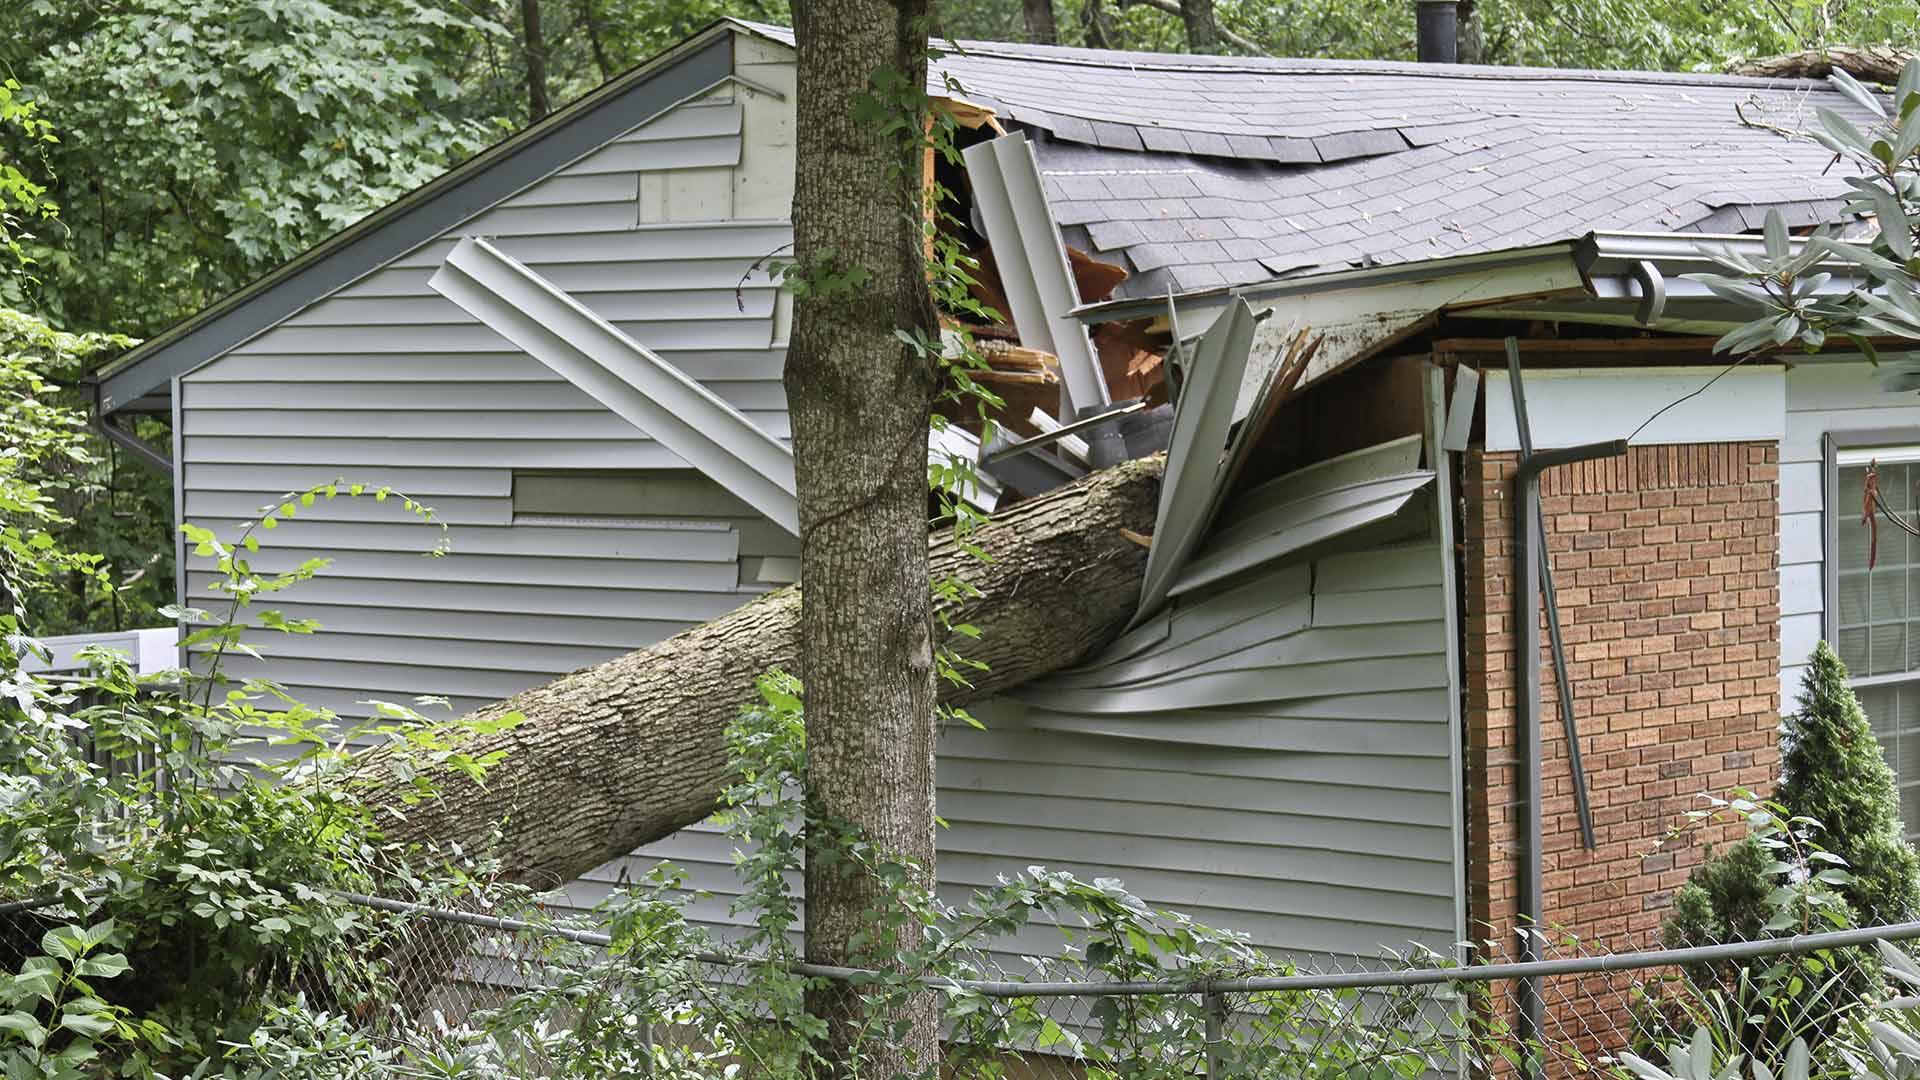 Home damaged by a fallen tree. The tree has crashed into the home's living room.